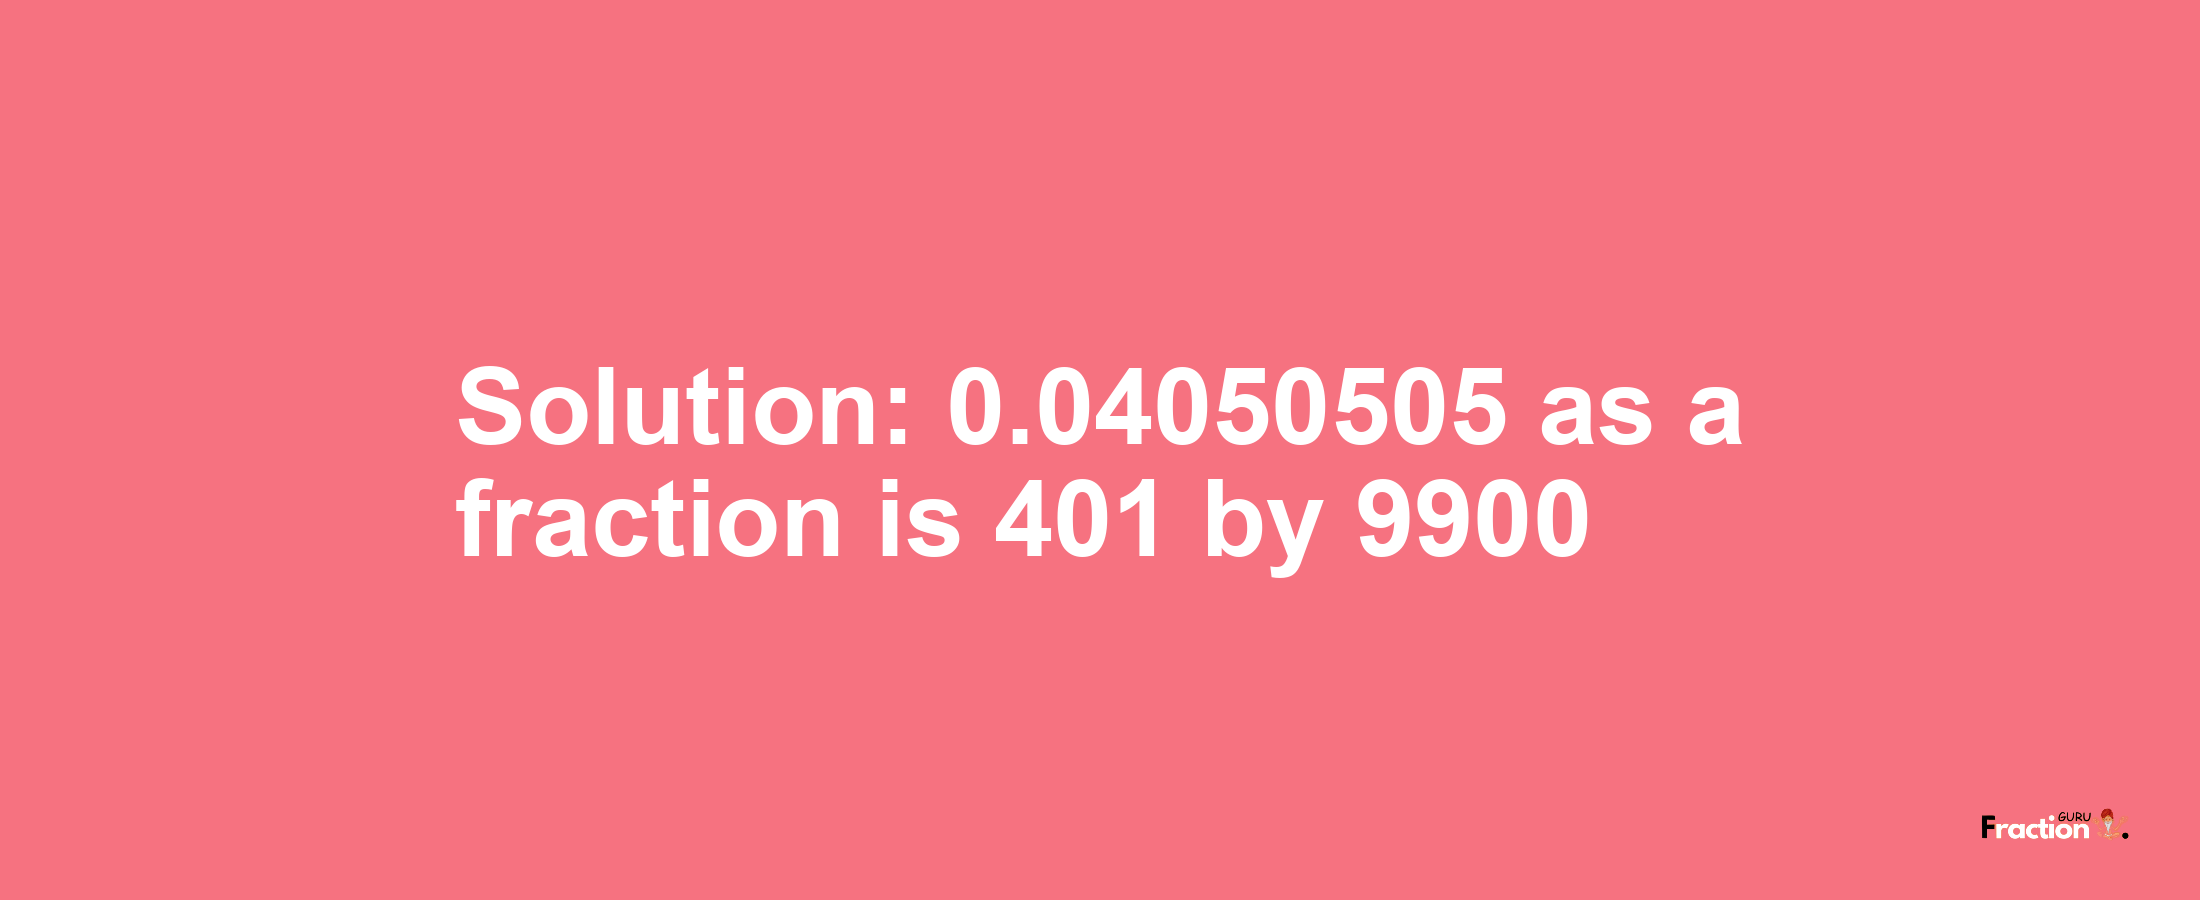 Solution:0.04050505 as a fraction is 401/9900